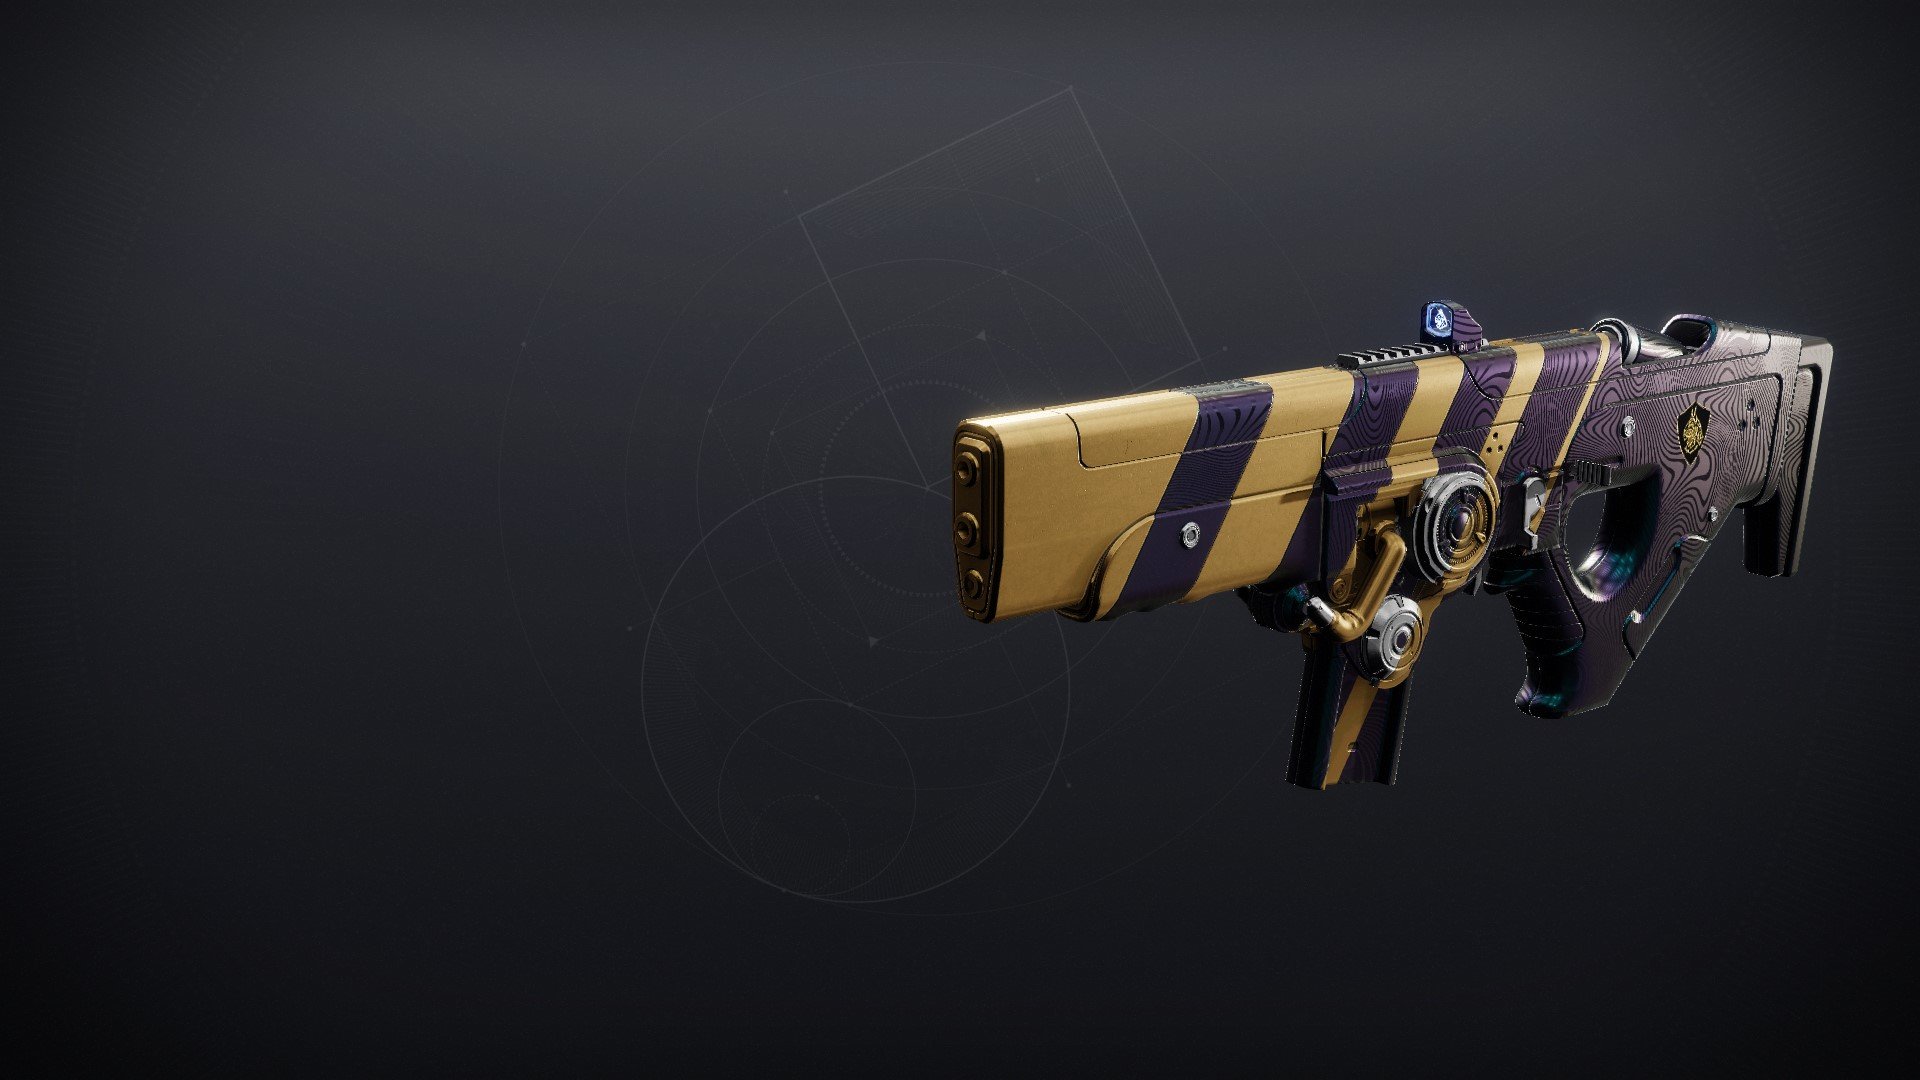 An in-game render of the Hung Jury SR4.